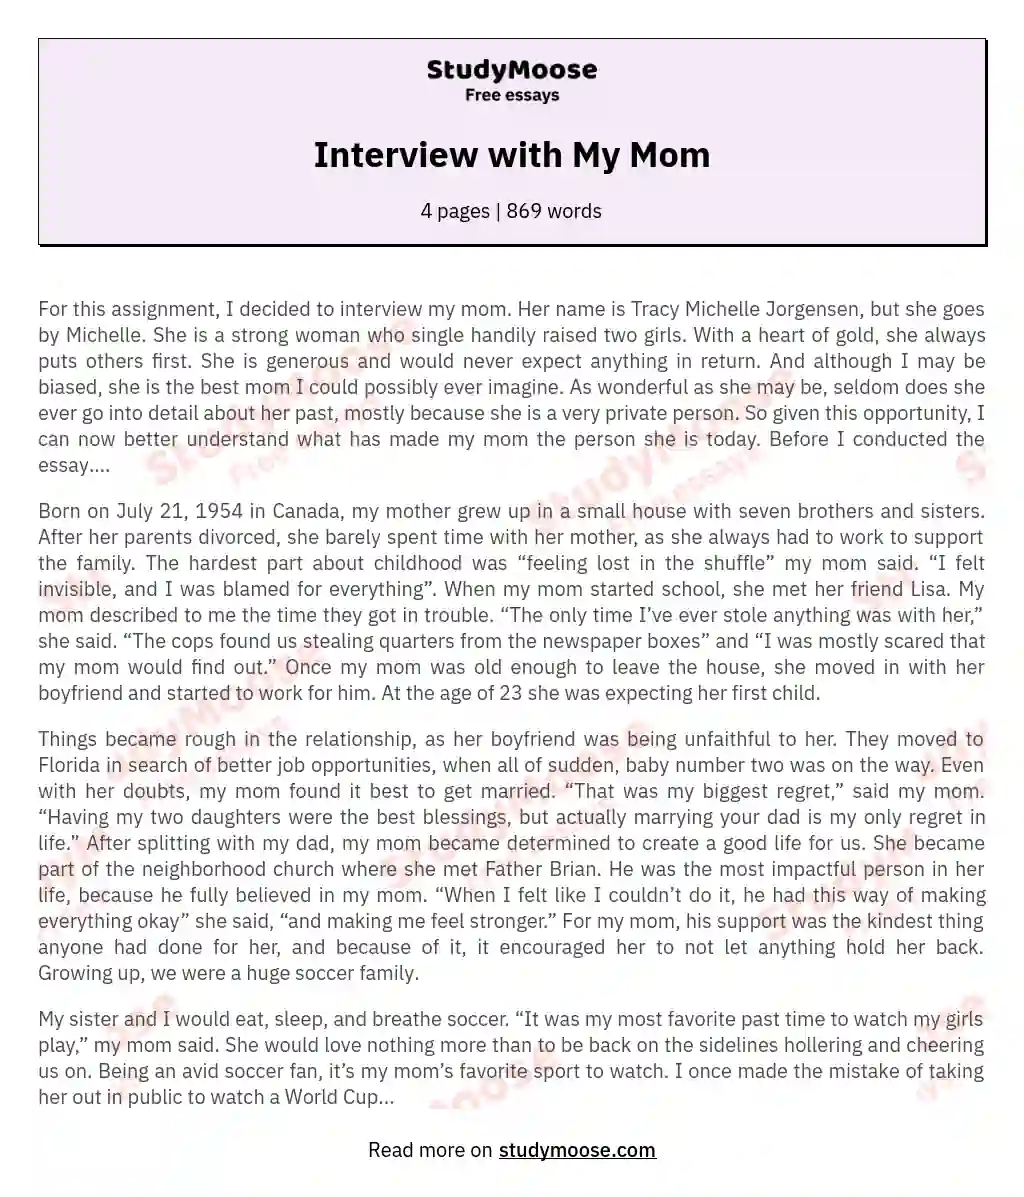 Interview with My Mom essay